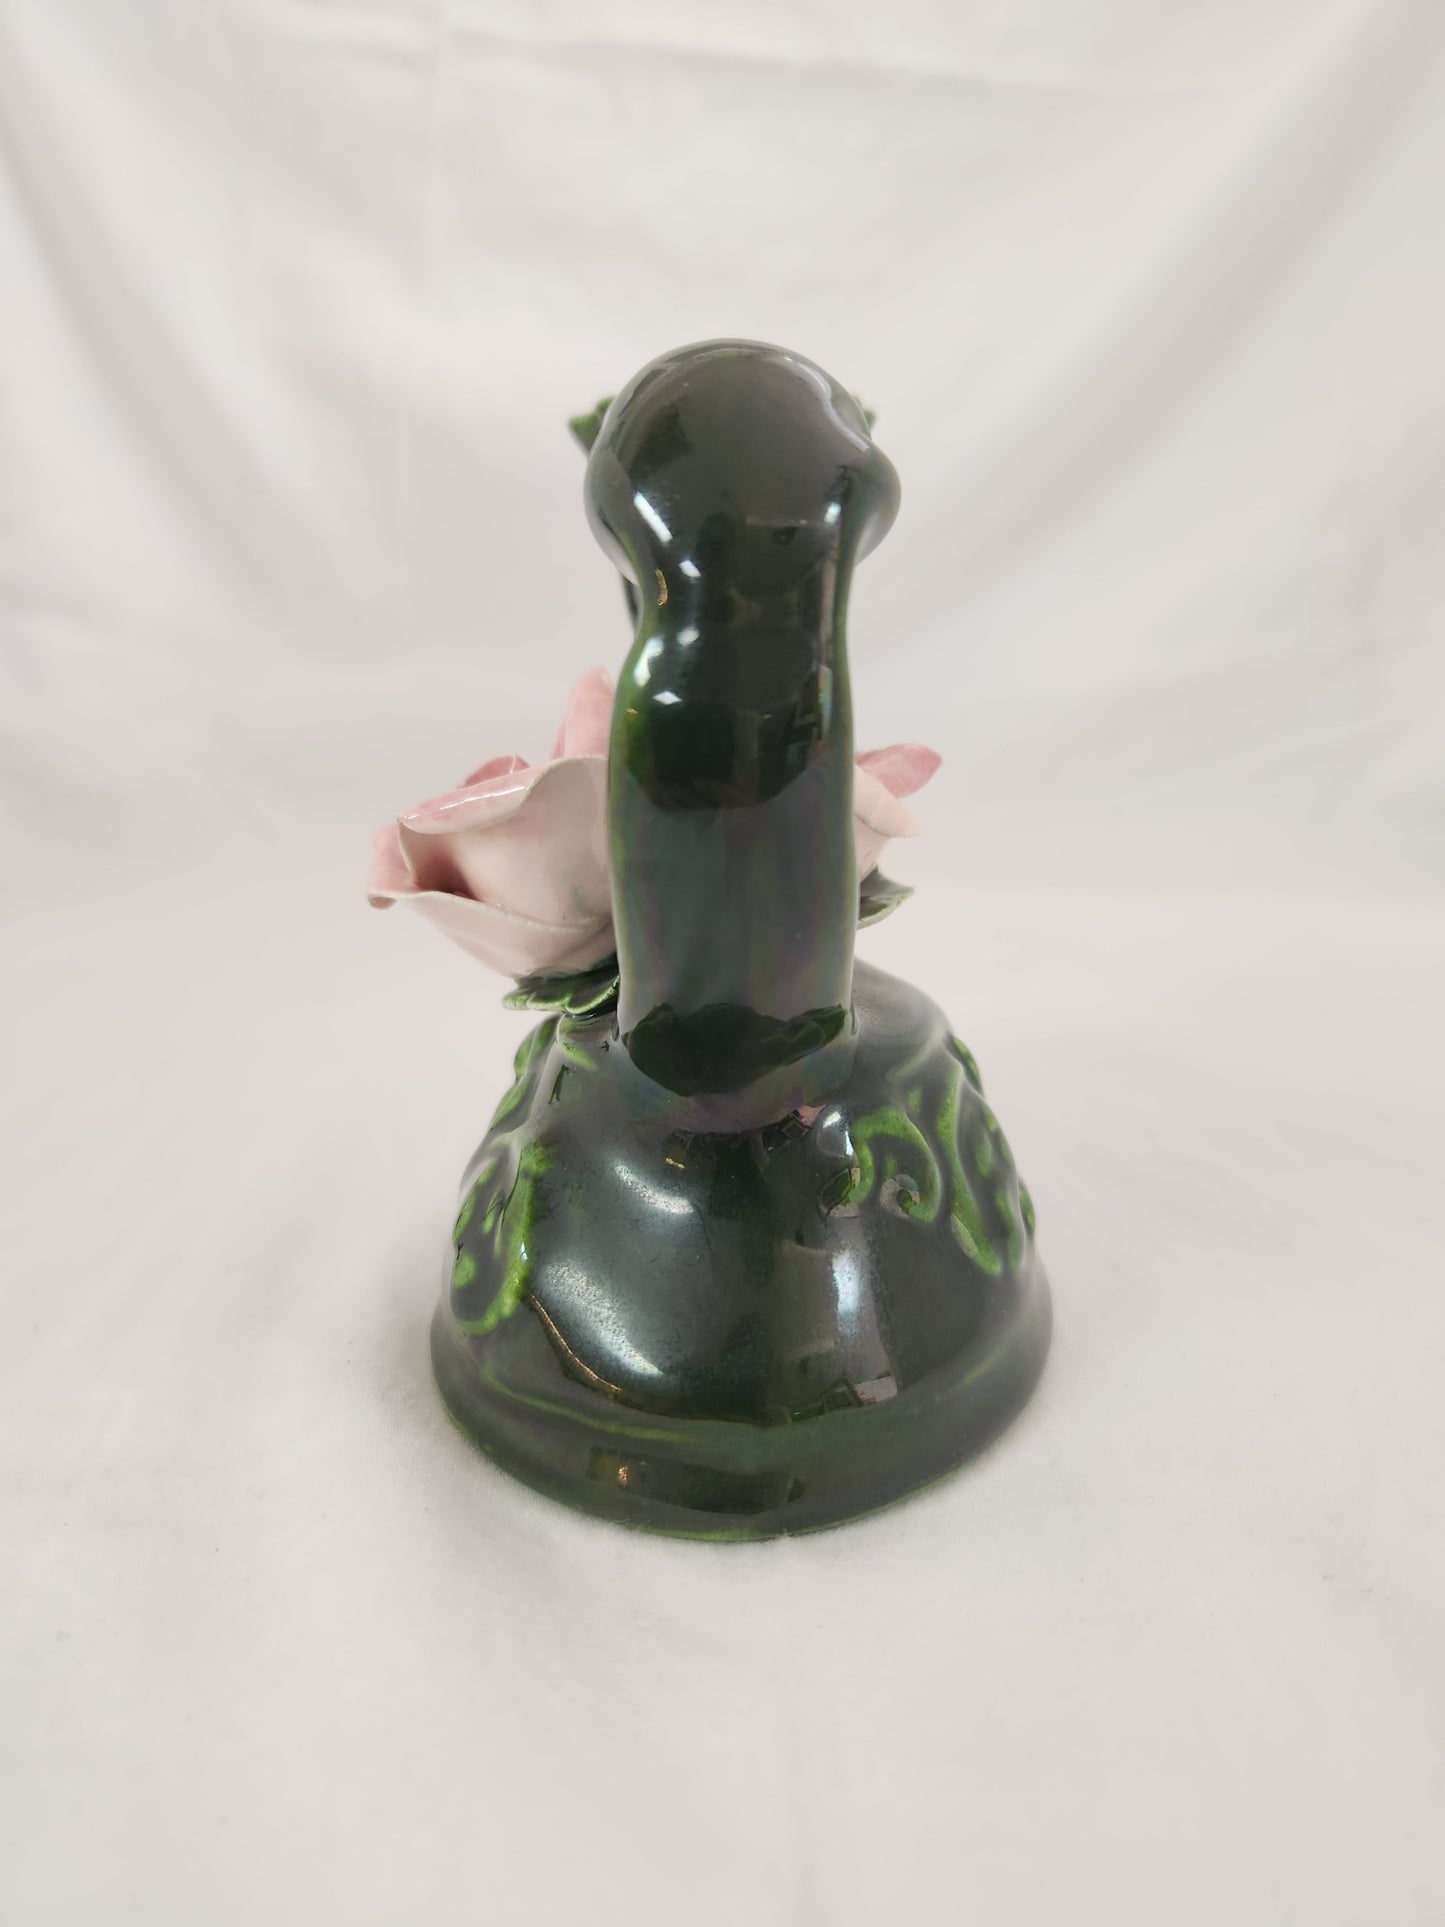 Green Ceramic Candle Holder w/Two Pink Capodimonte Style Roses